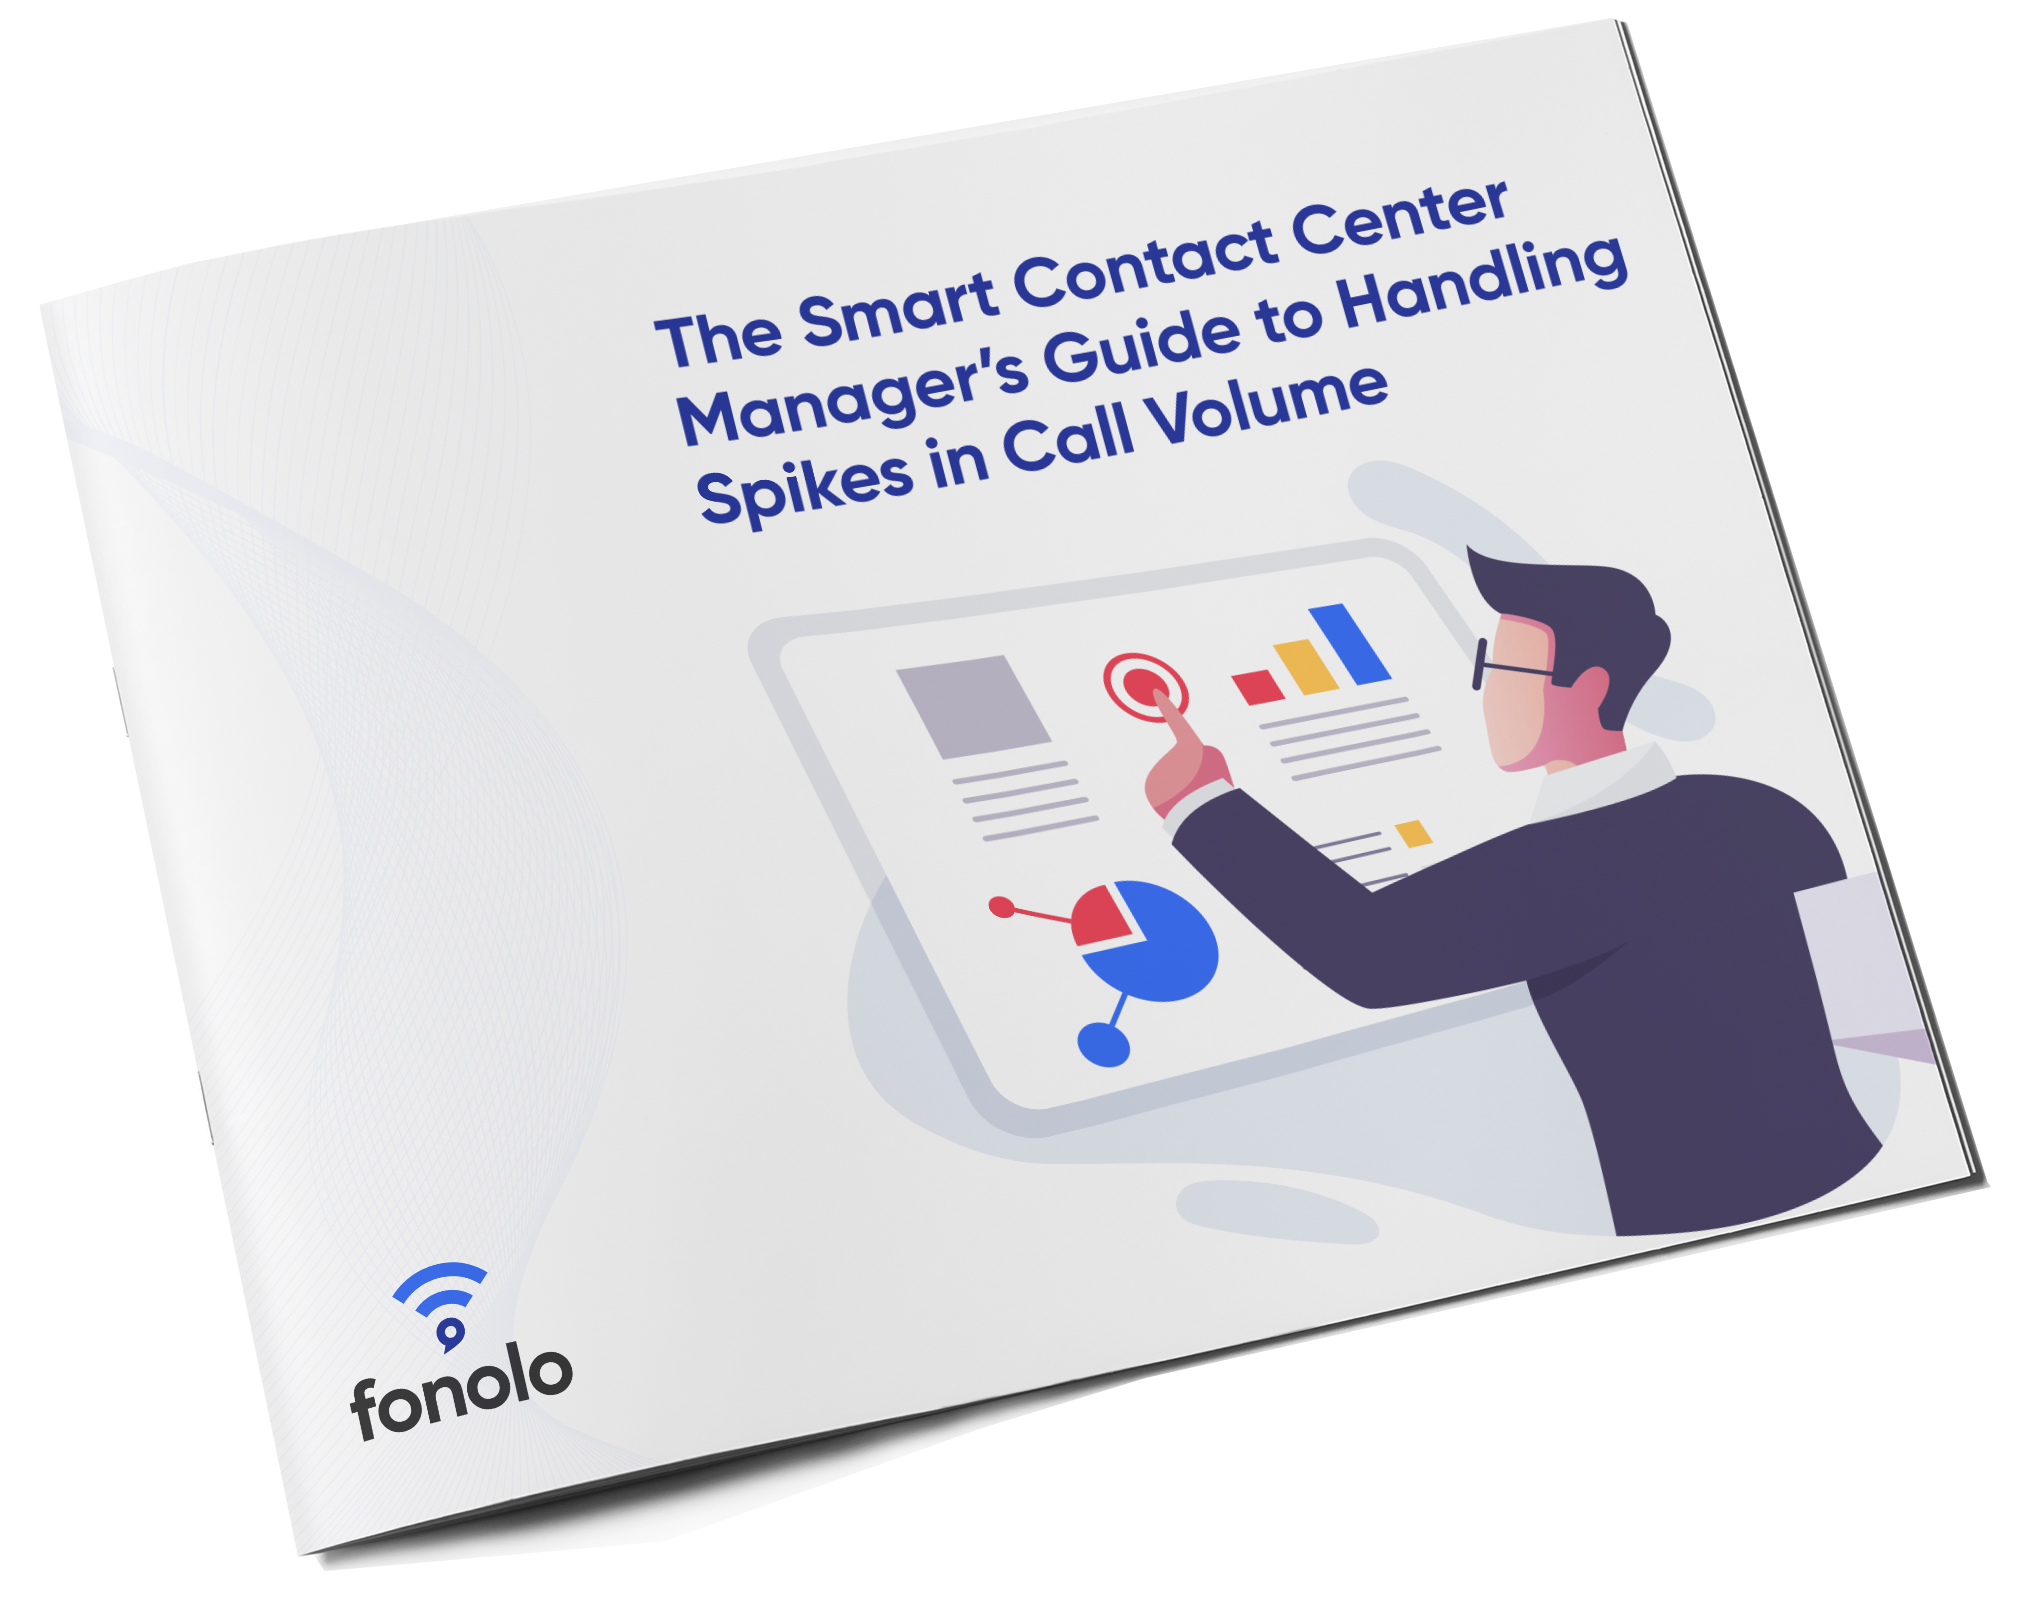 The_Smart_Contact_Center_Managers_Guide_to_Handling_Spikes_in_Call_Volume